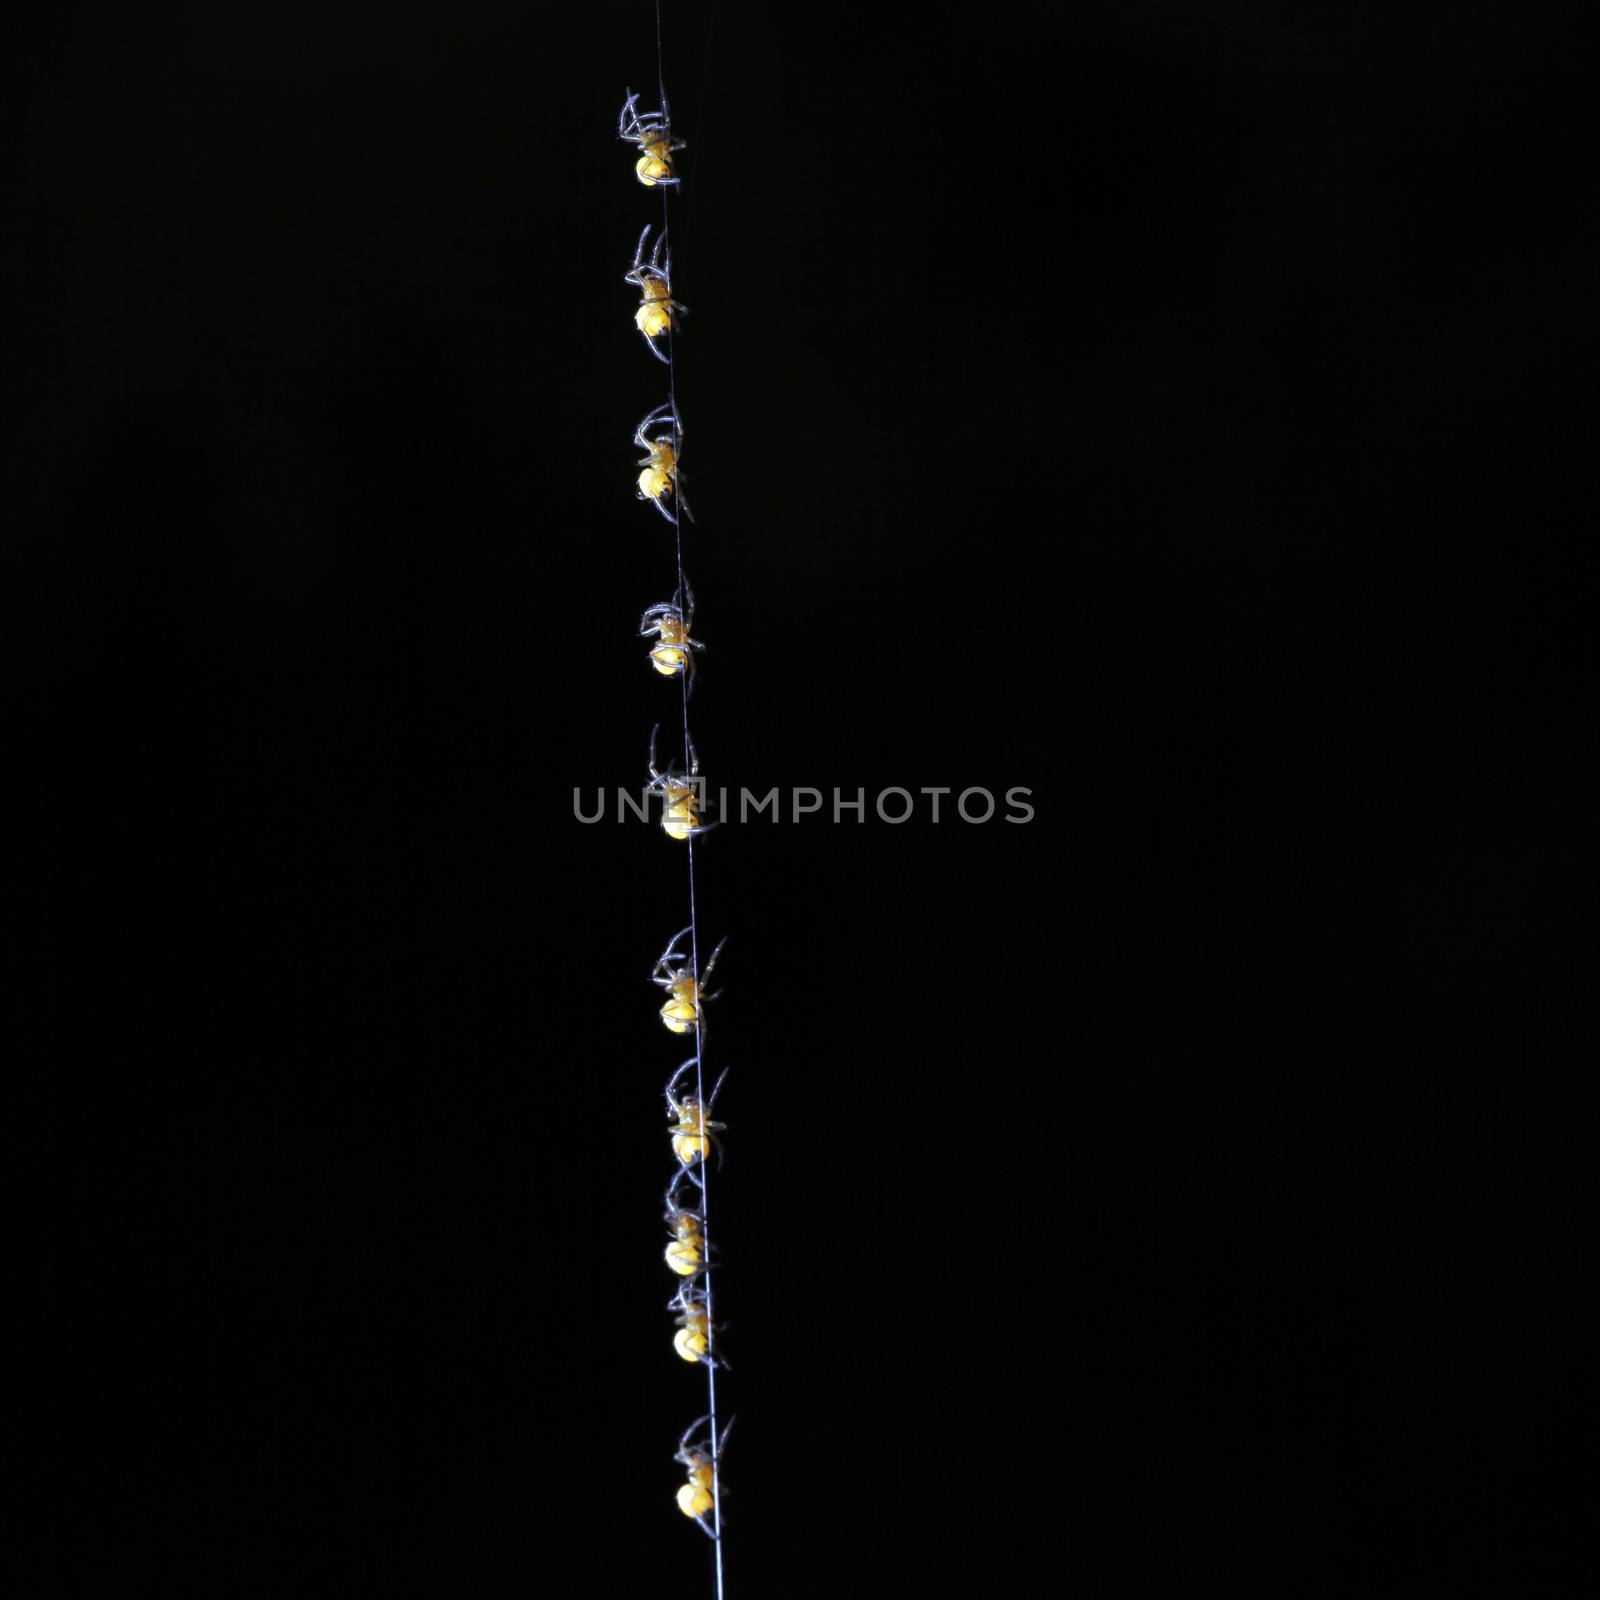 row of small yellow spiders following one another climbing up a thread against black background